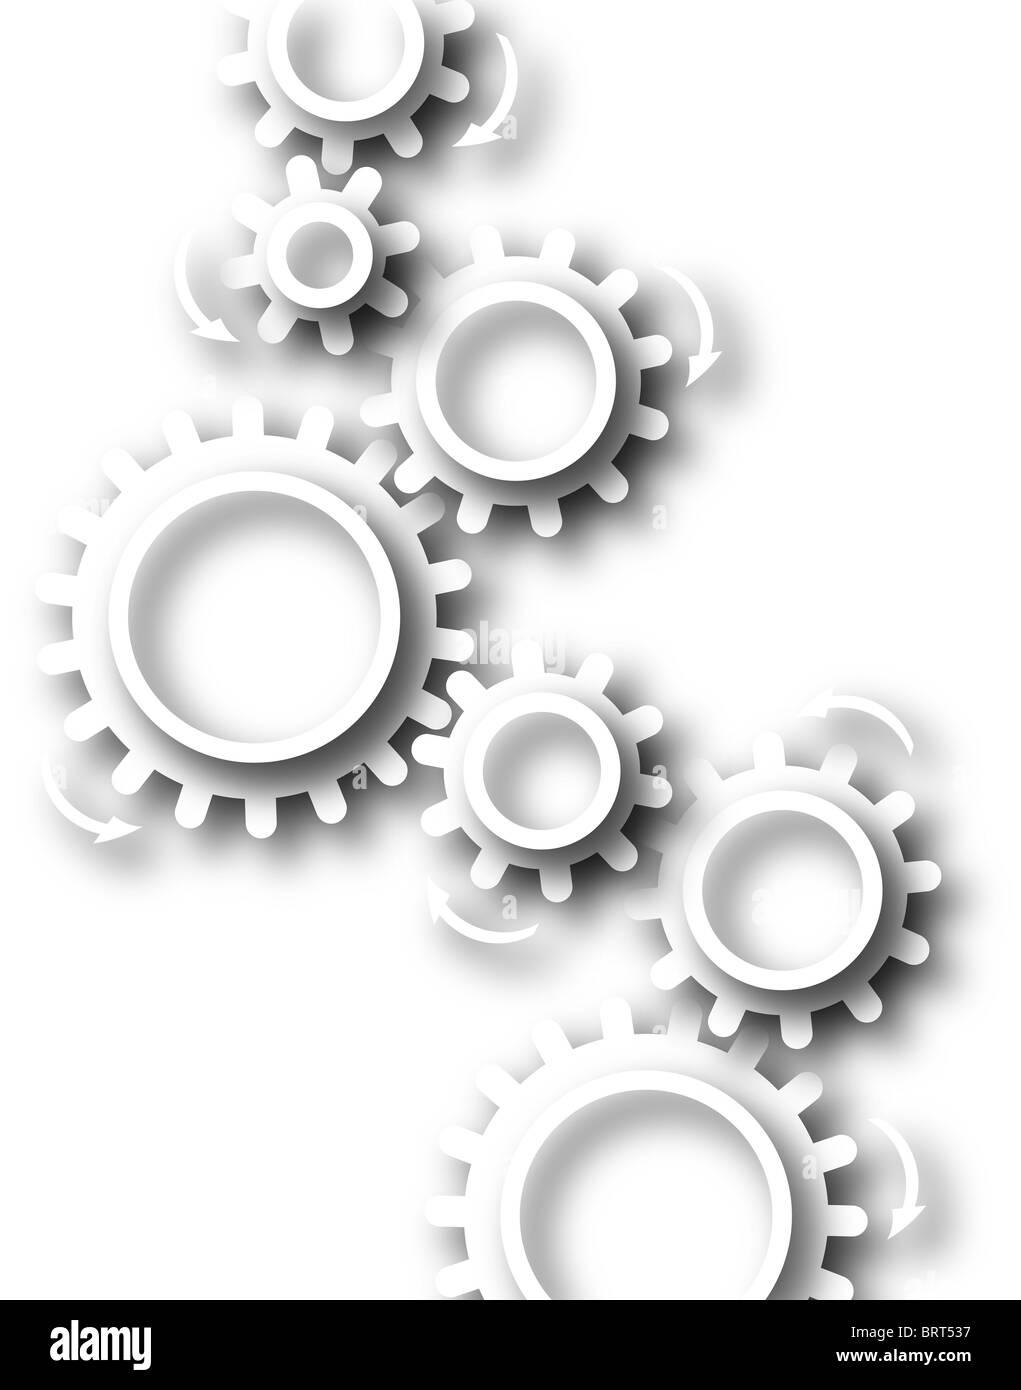 Abstract design of white cutout cog wheels Stock Photo